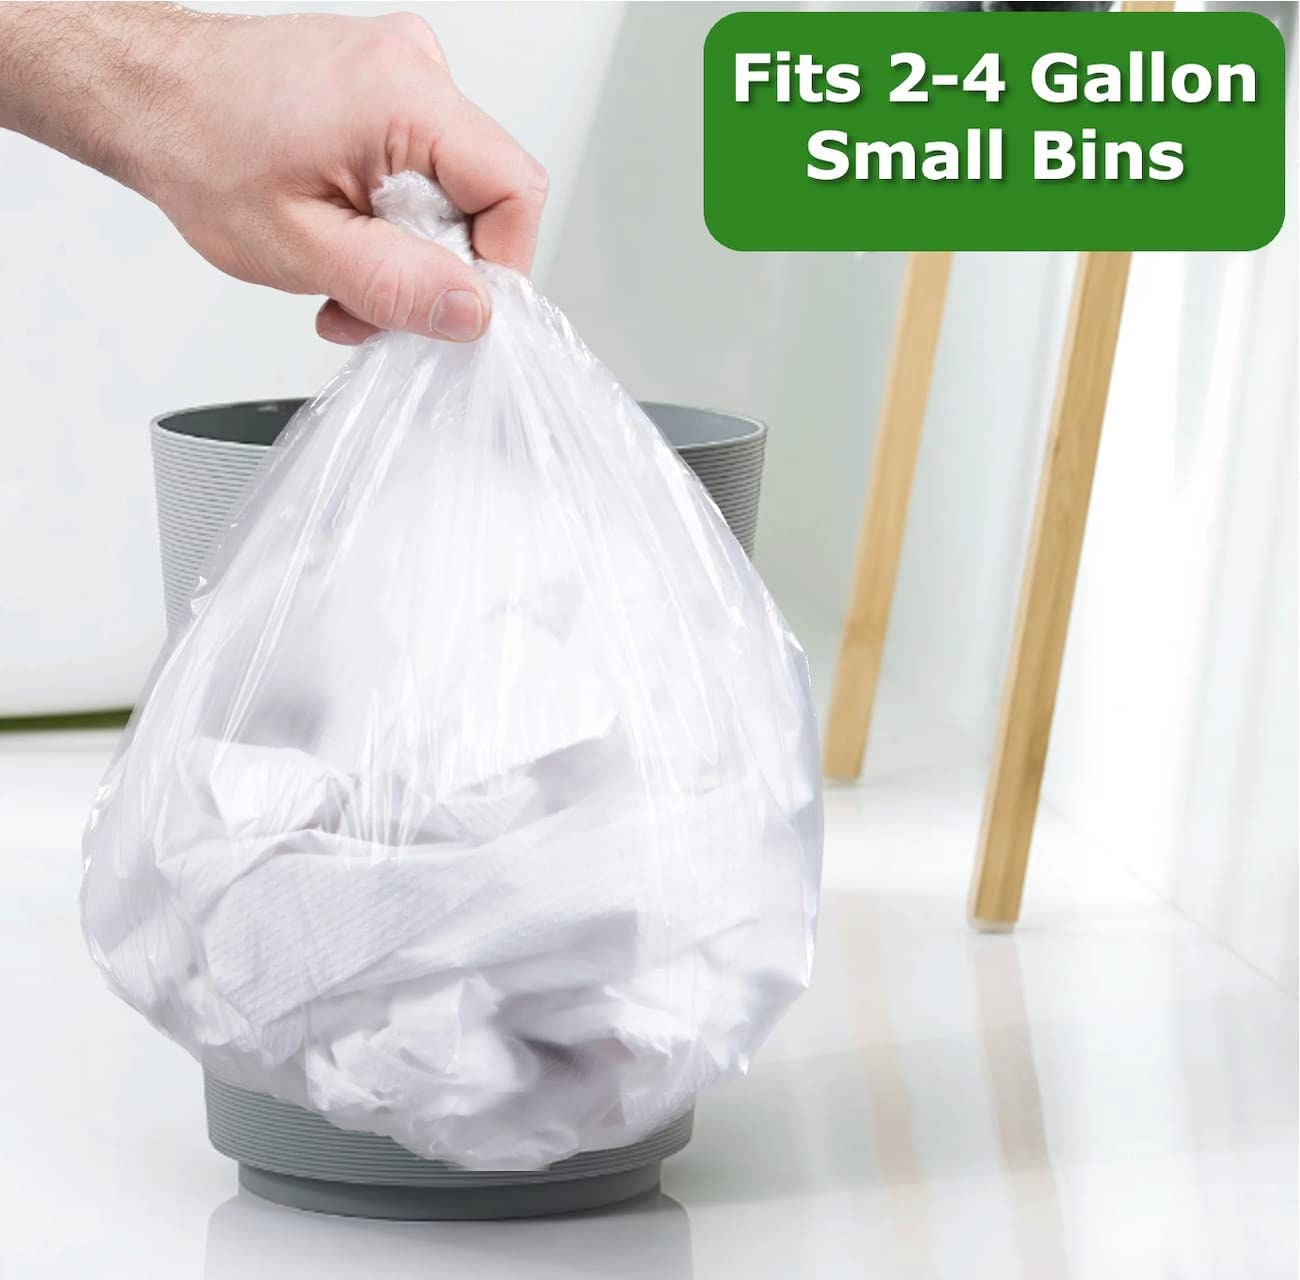 1.2 Gallon Colored Garbage Bags Bathroom Trash Can Liners 420